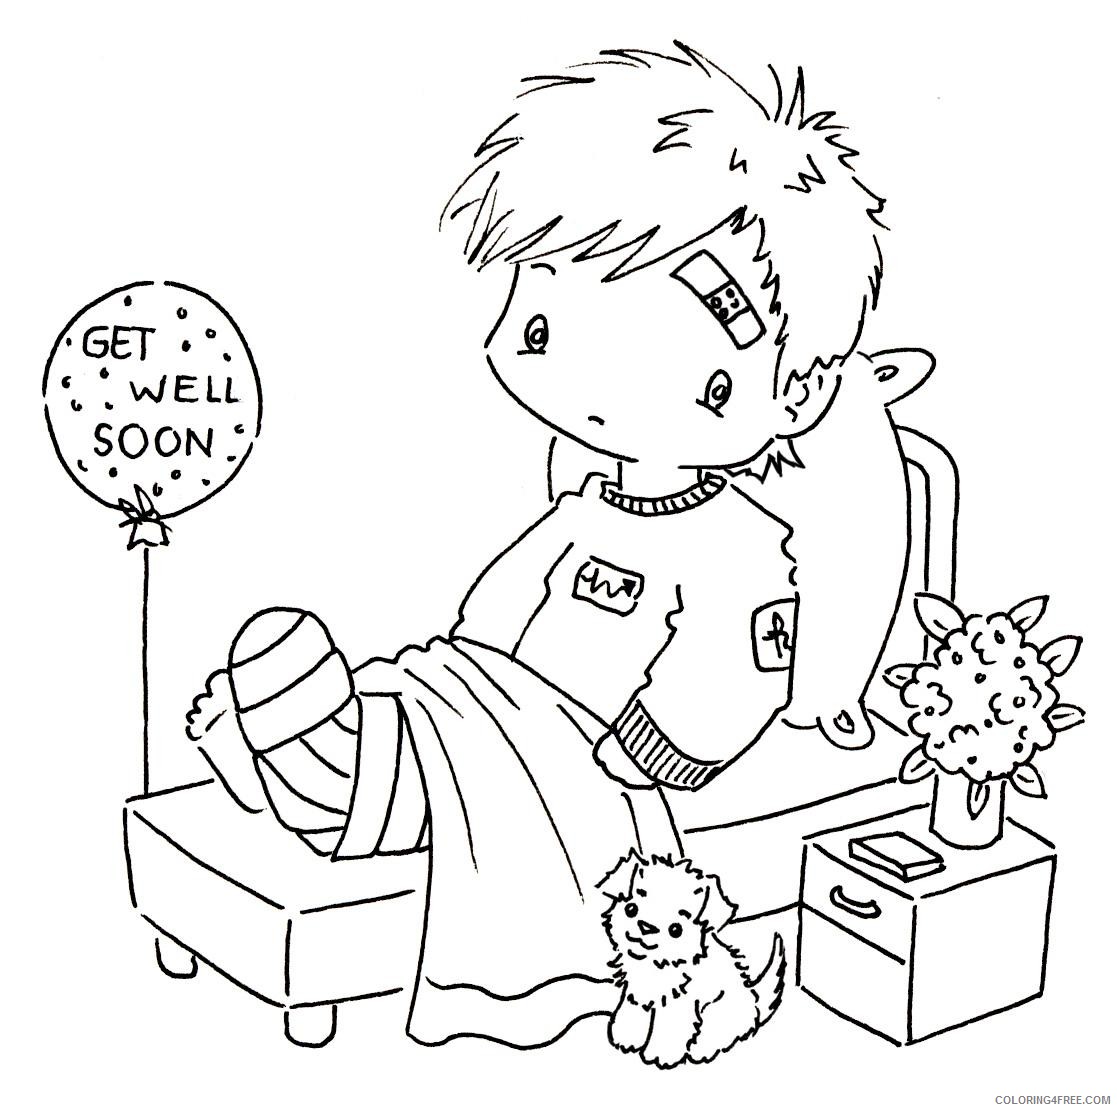 get well soon coloring pages for boys Coloring4free